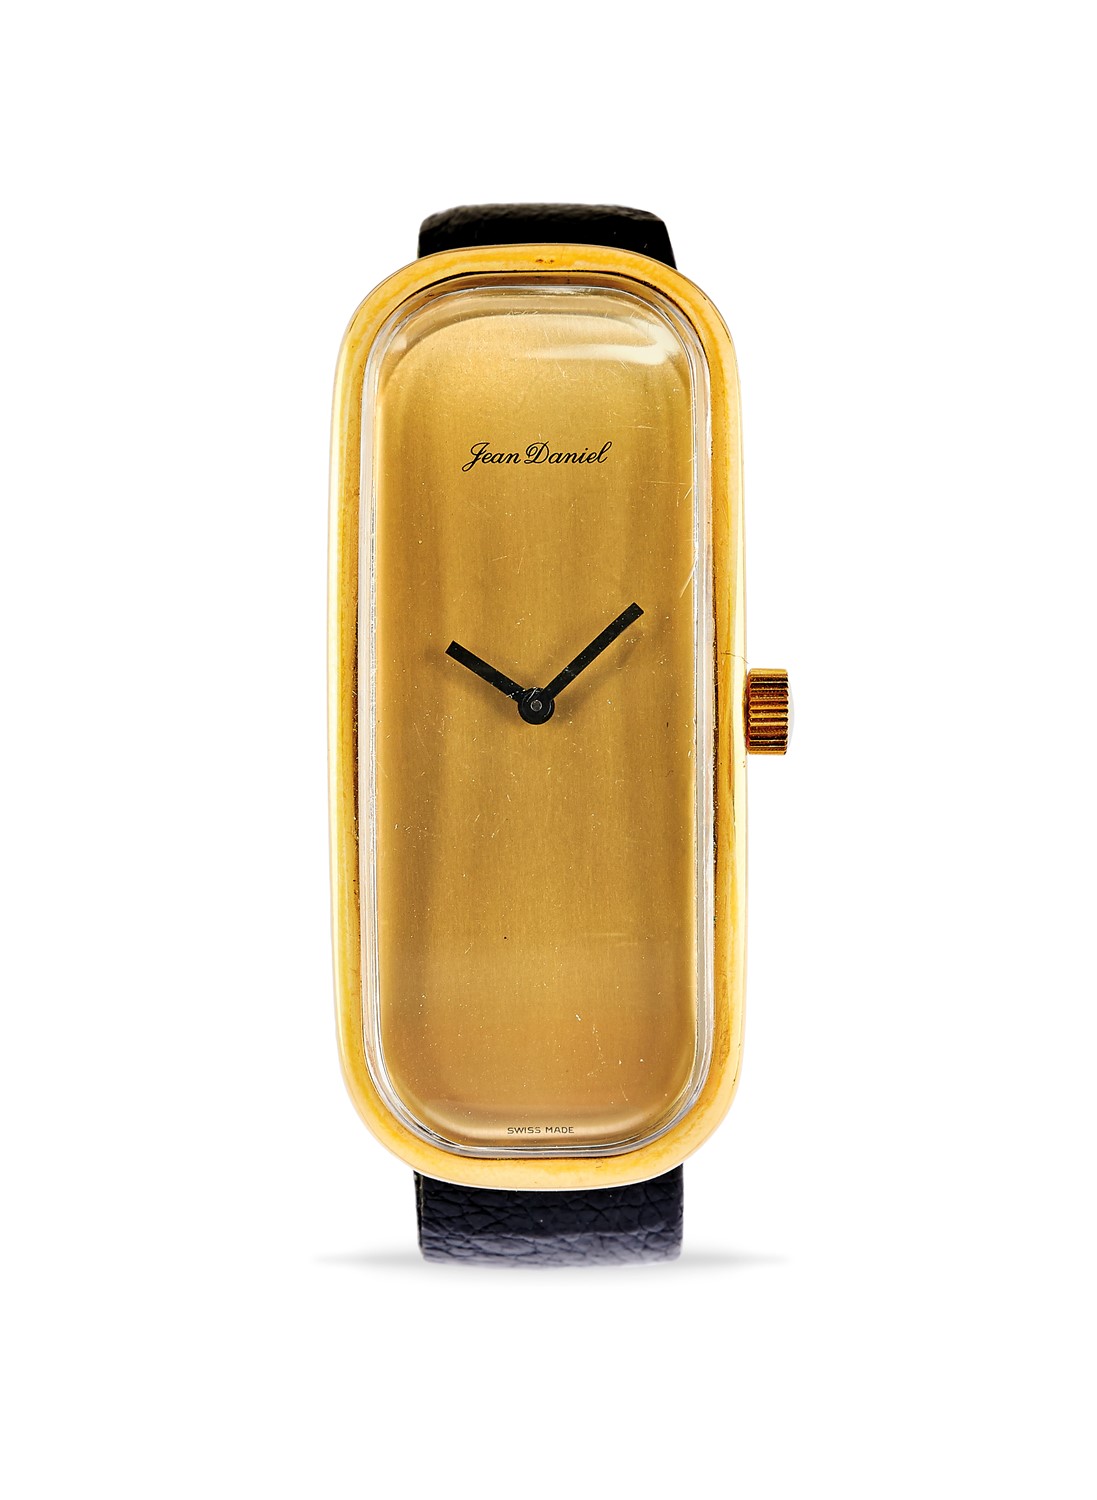 Jean Daniel - A yellow gold plated man's wristwatch, Jean Daniel - A yellow gold [...]